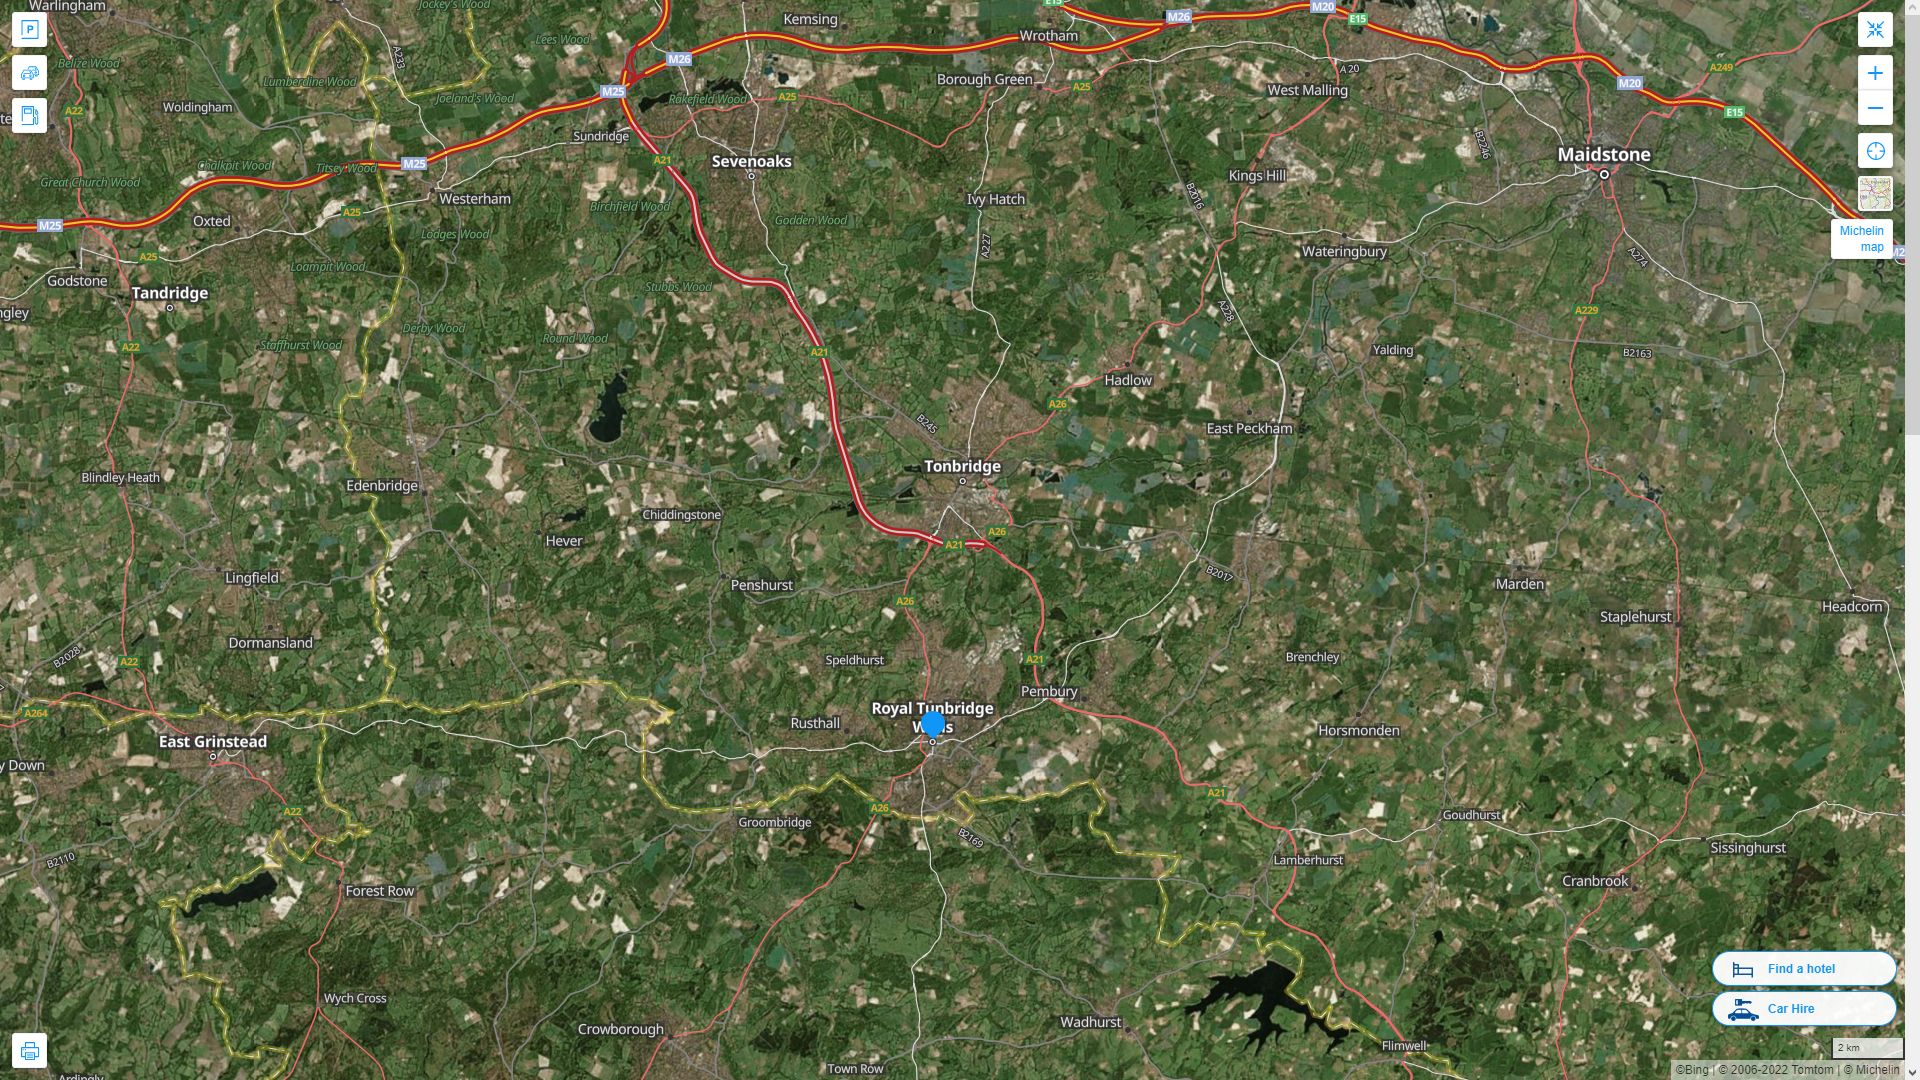 Royal Tunbridge Wells Highway and Road Map with Satellite View